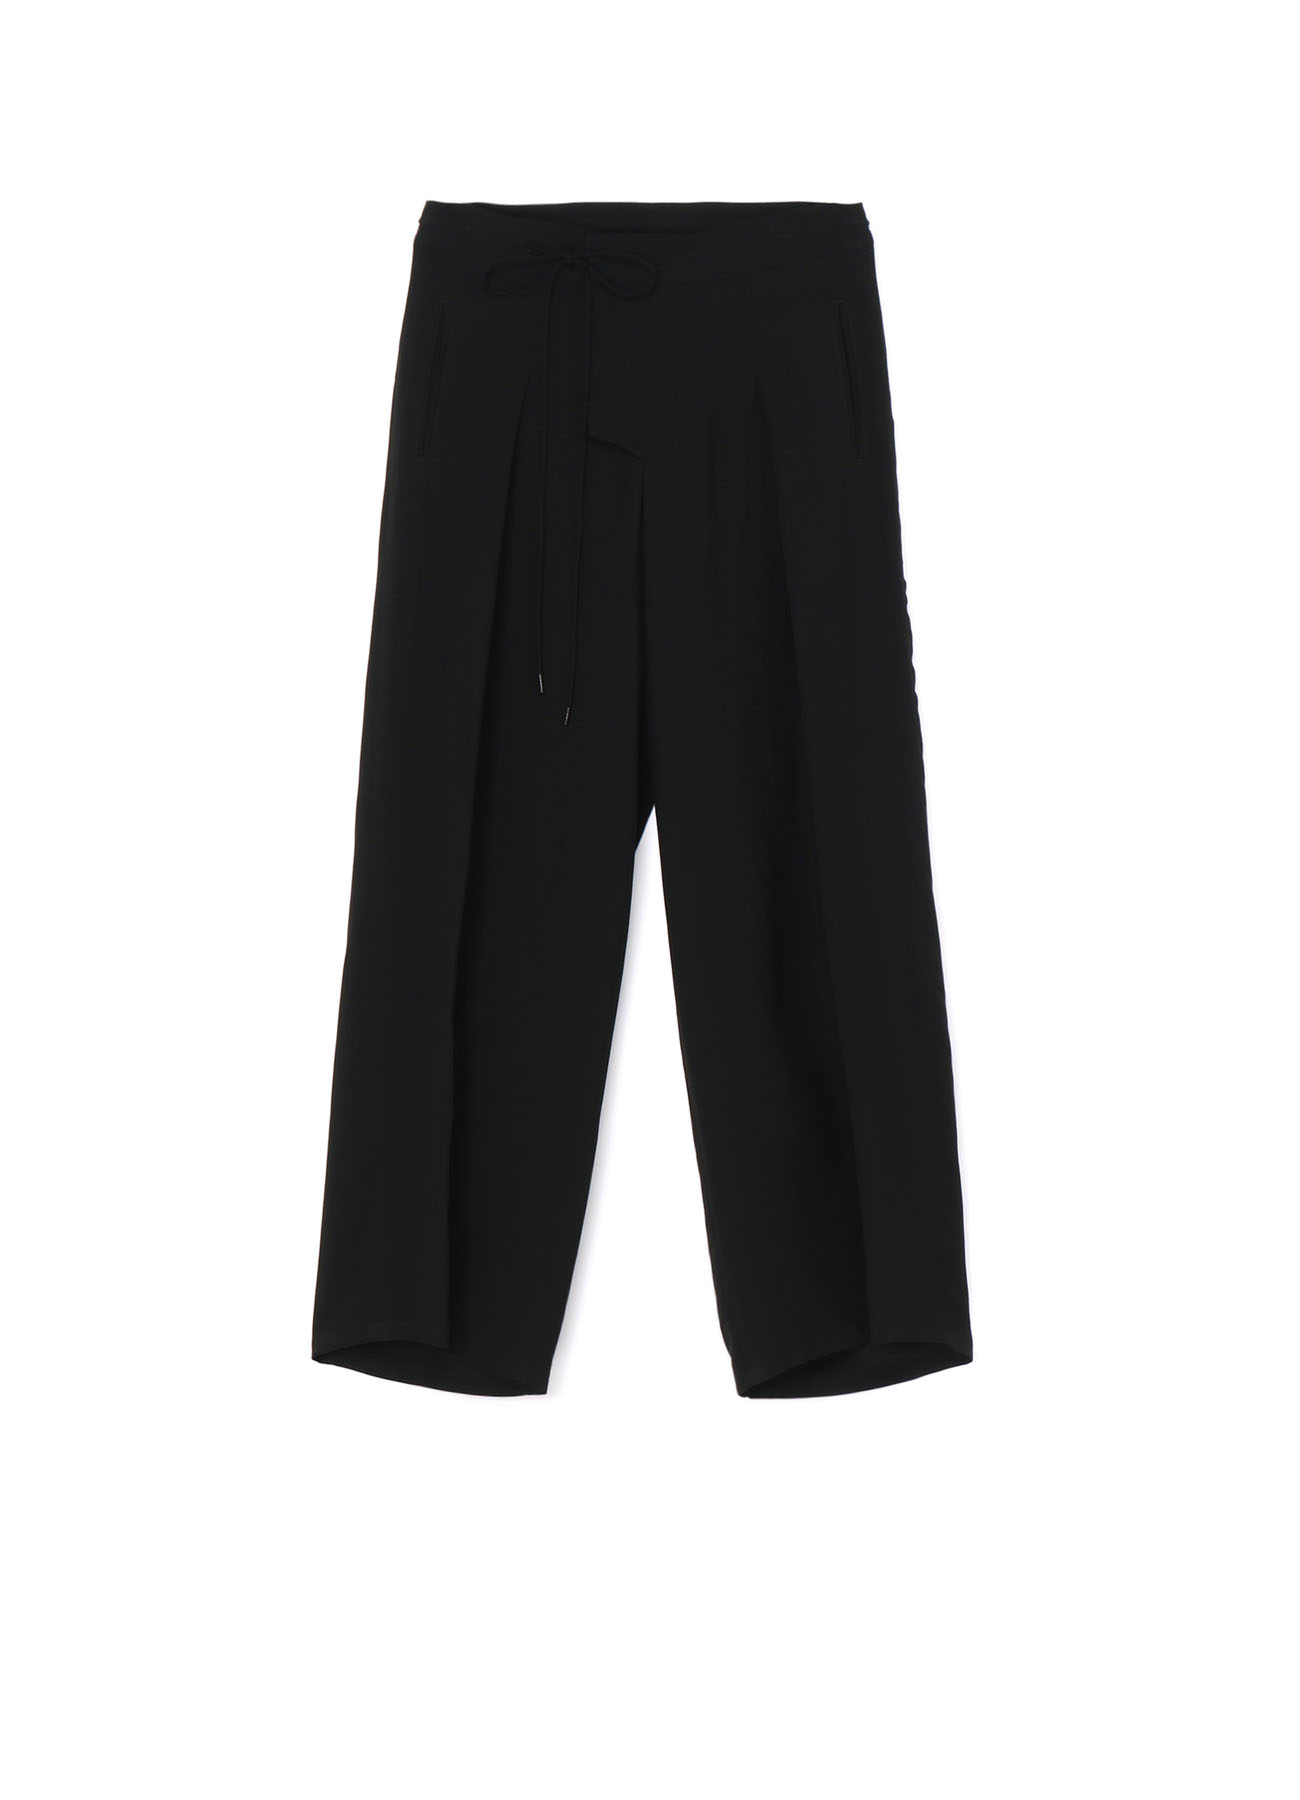 LY/CU TUSSAH WAIST STRING WIDE PANTS